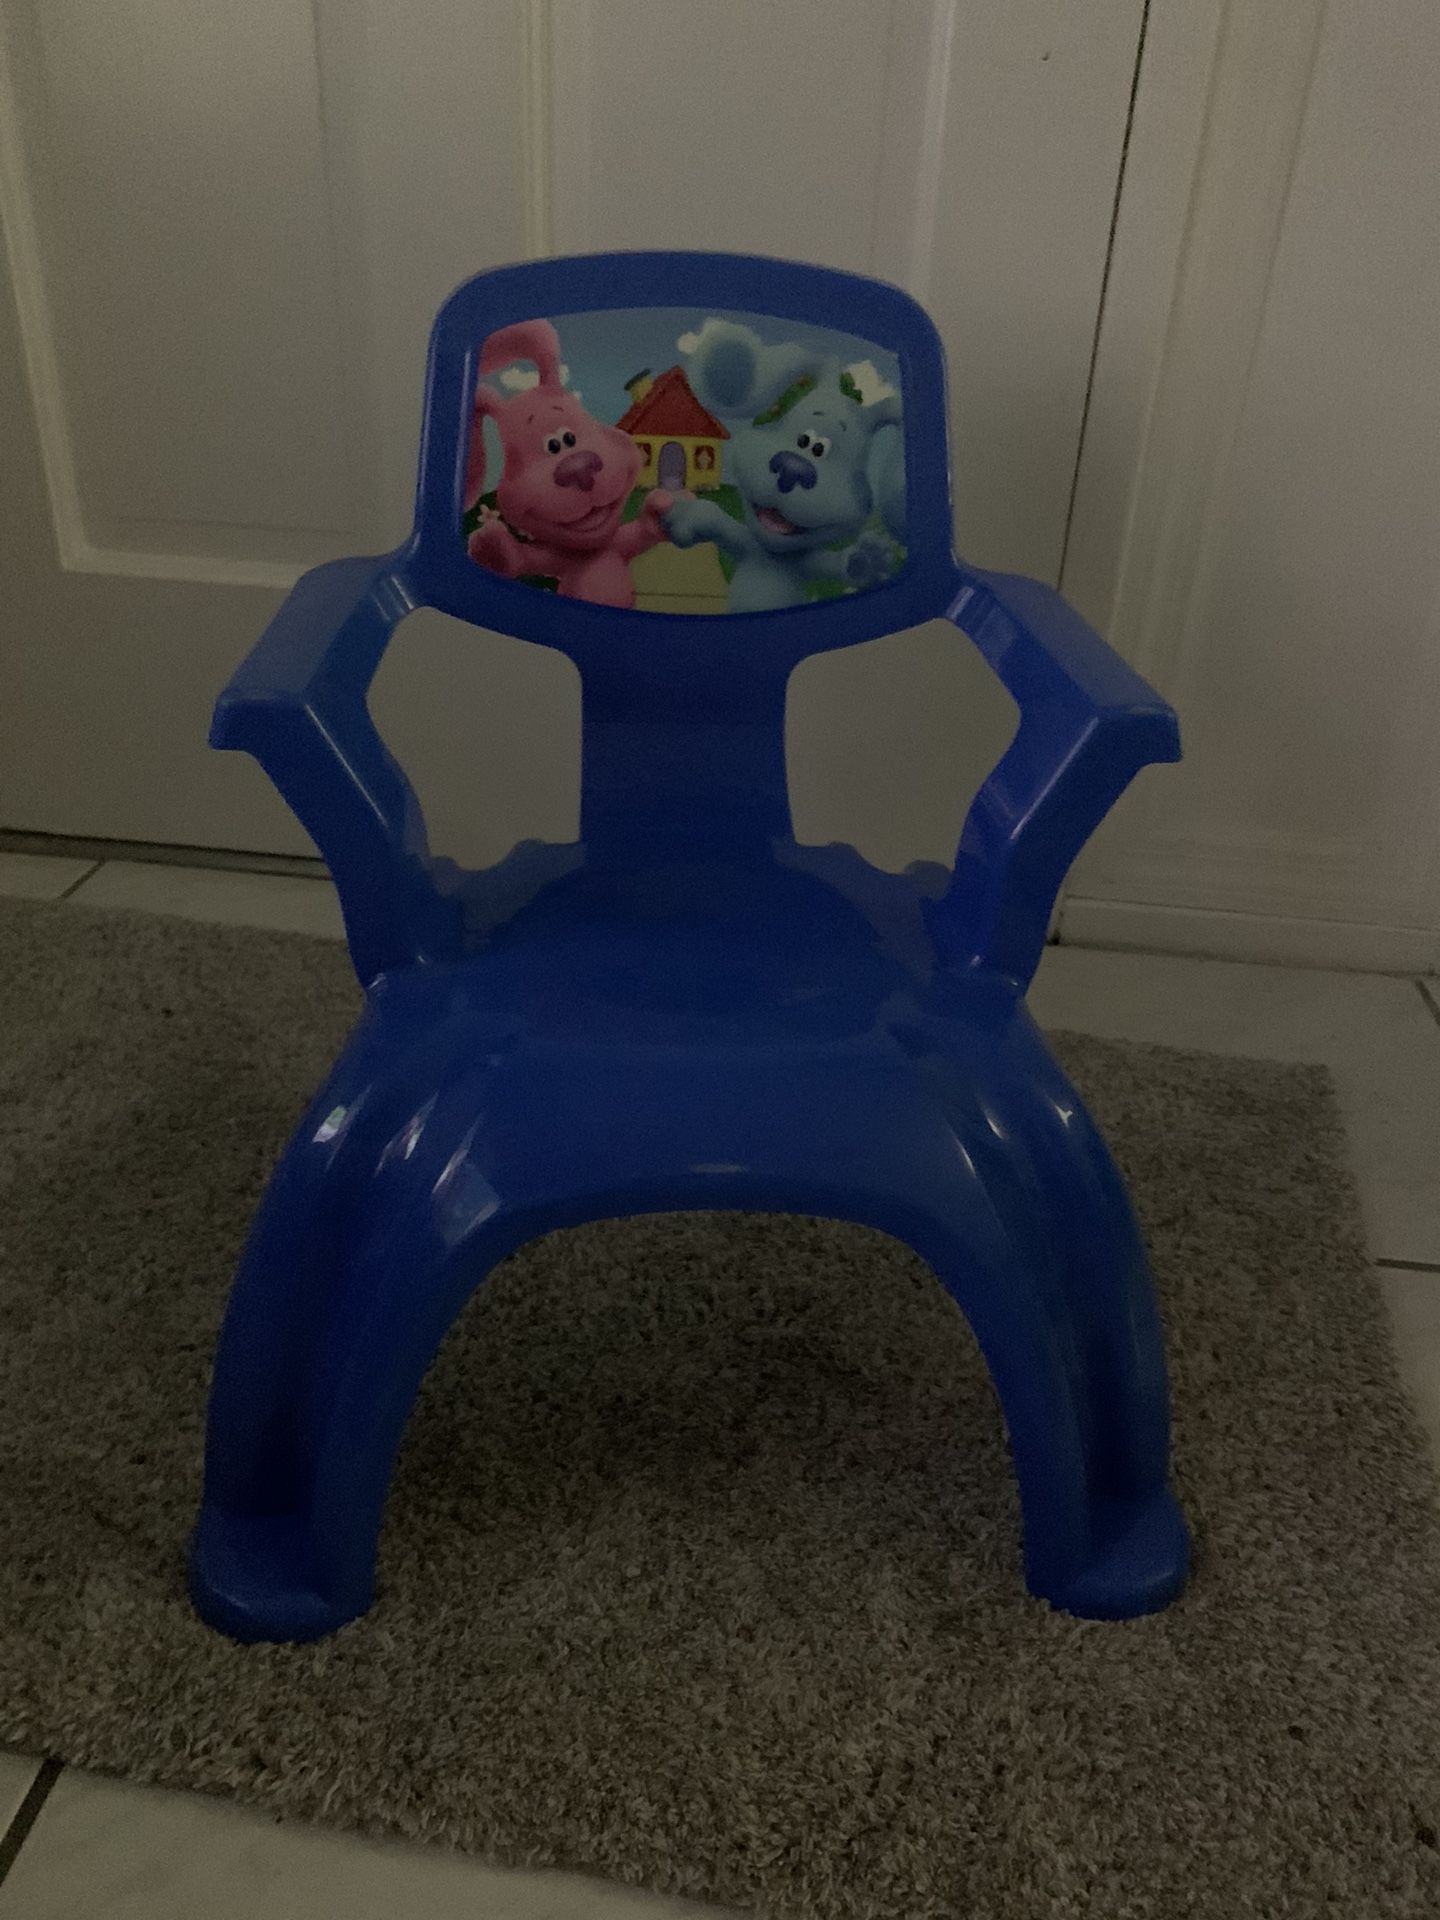 Blues Clues Resin Chair for Kids